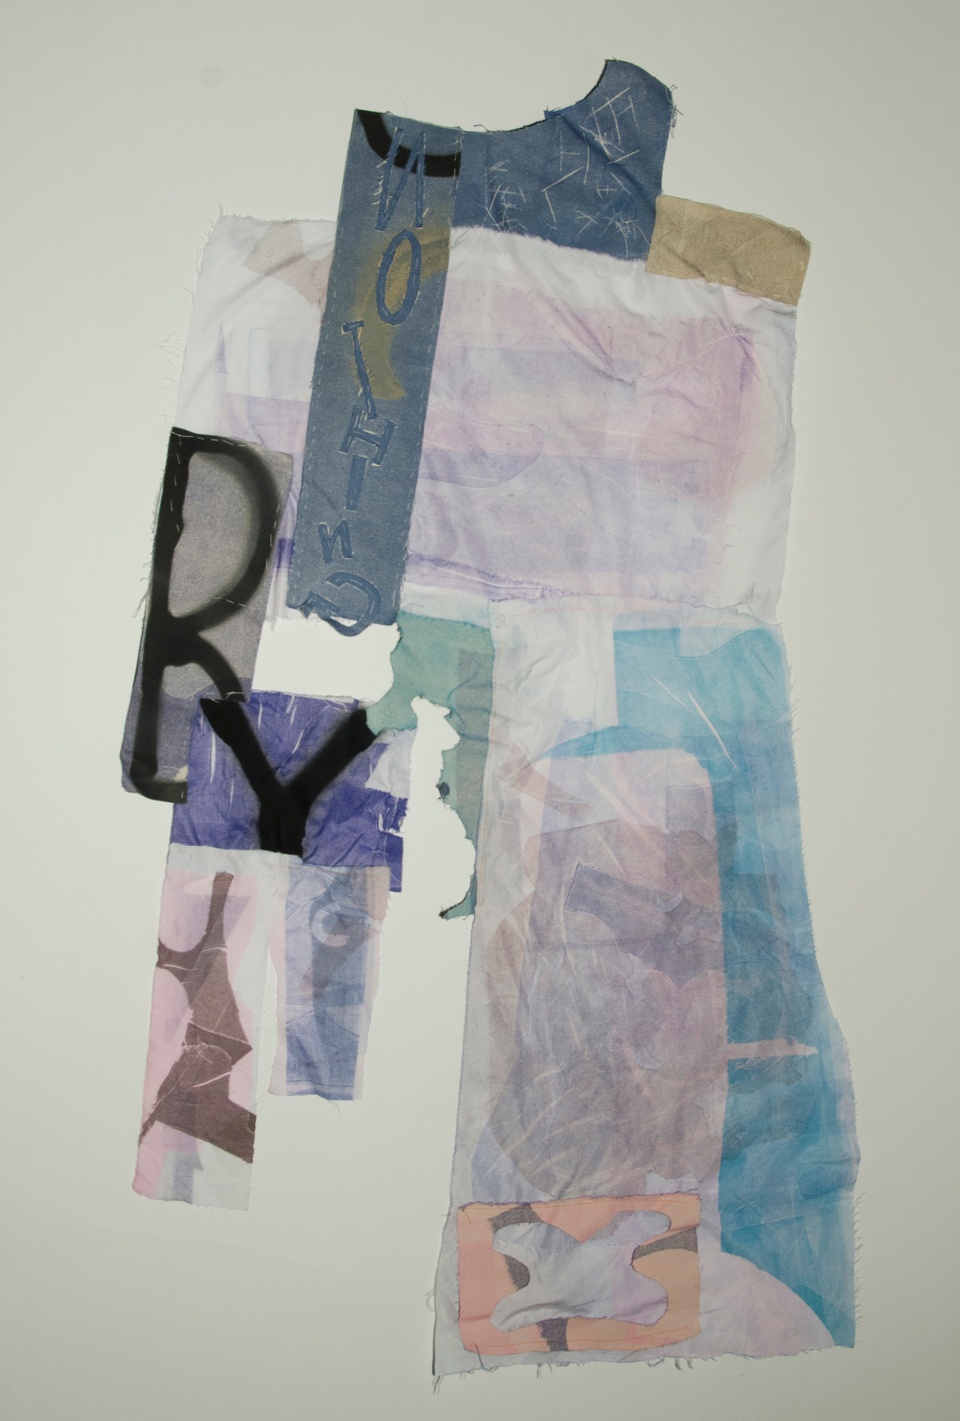 A collage of fabrics in hues of blues and purples. There are sewn letters spelling out 'Nothing'